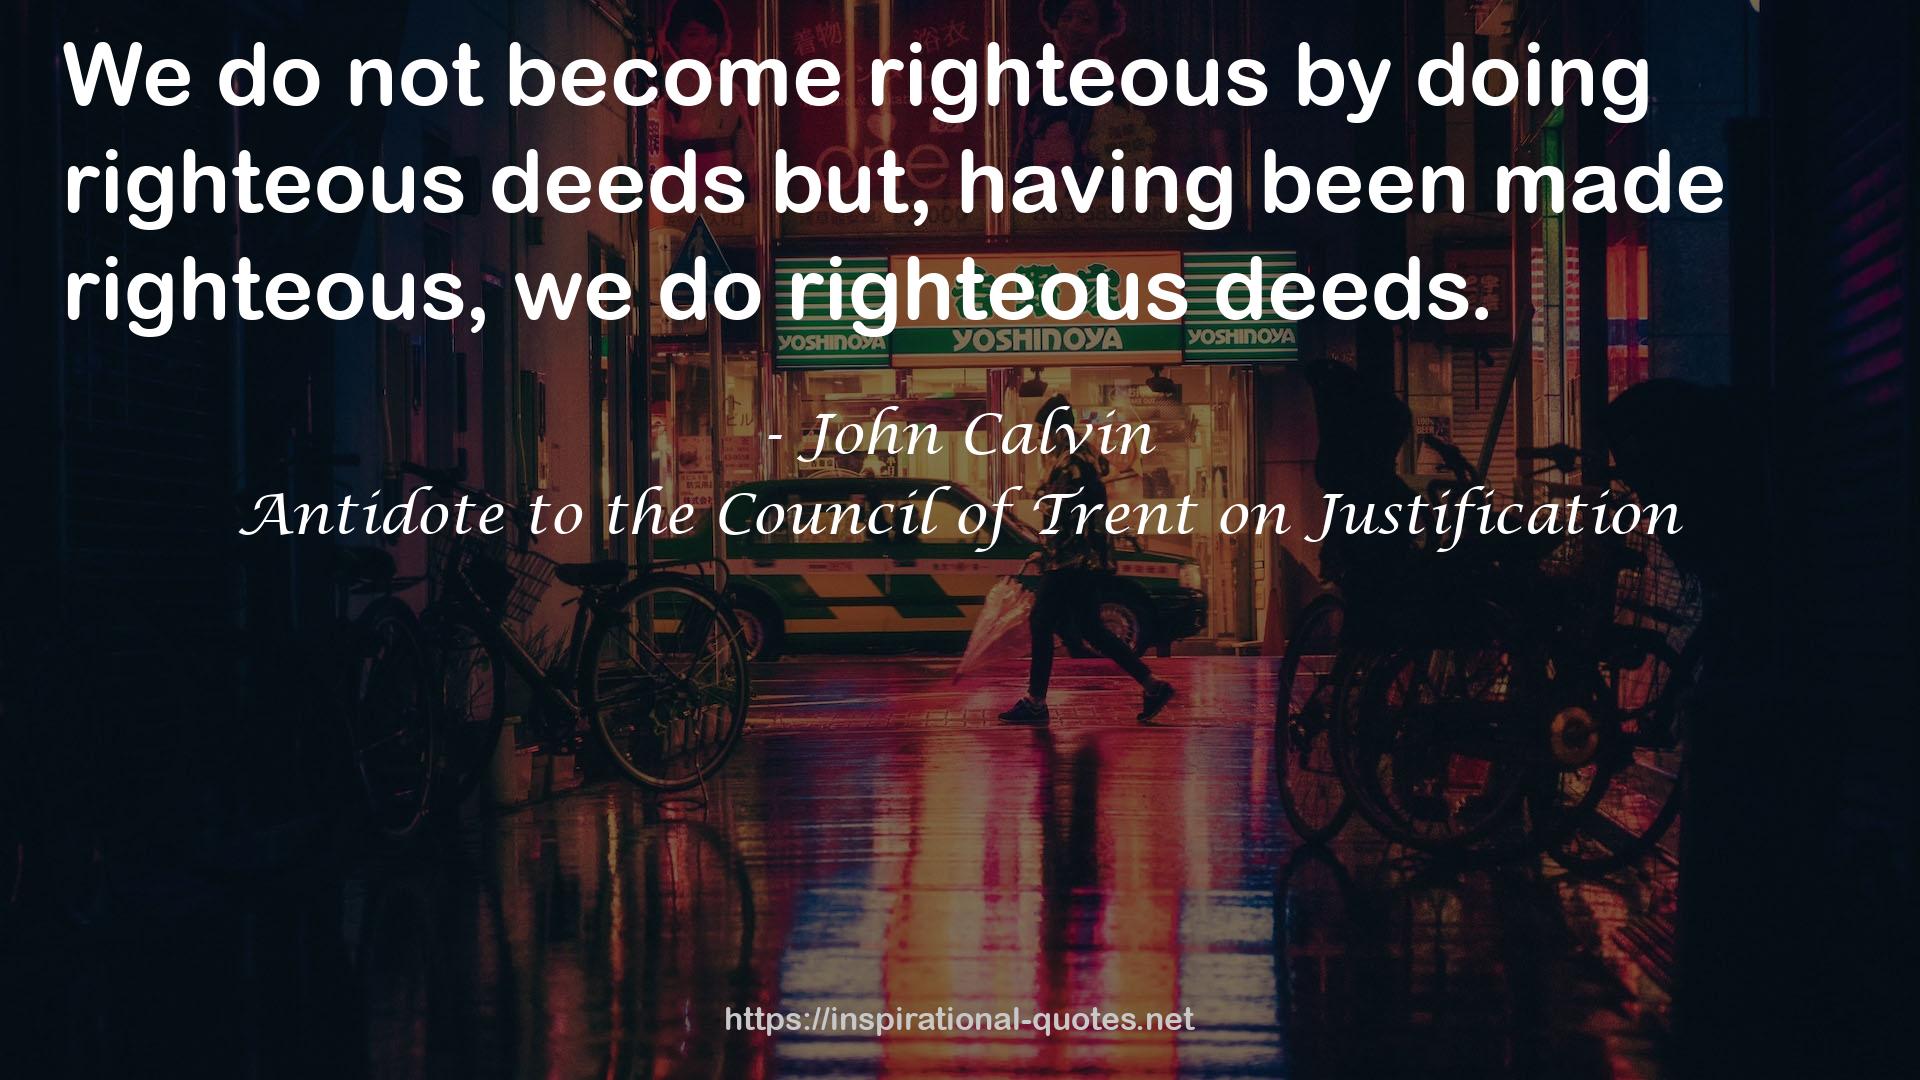 Antidote to the Council of Trent on Justification QUOTES